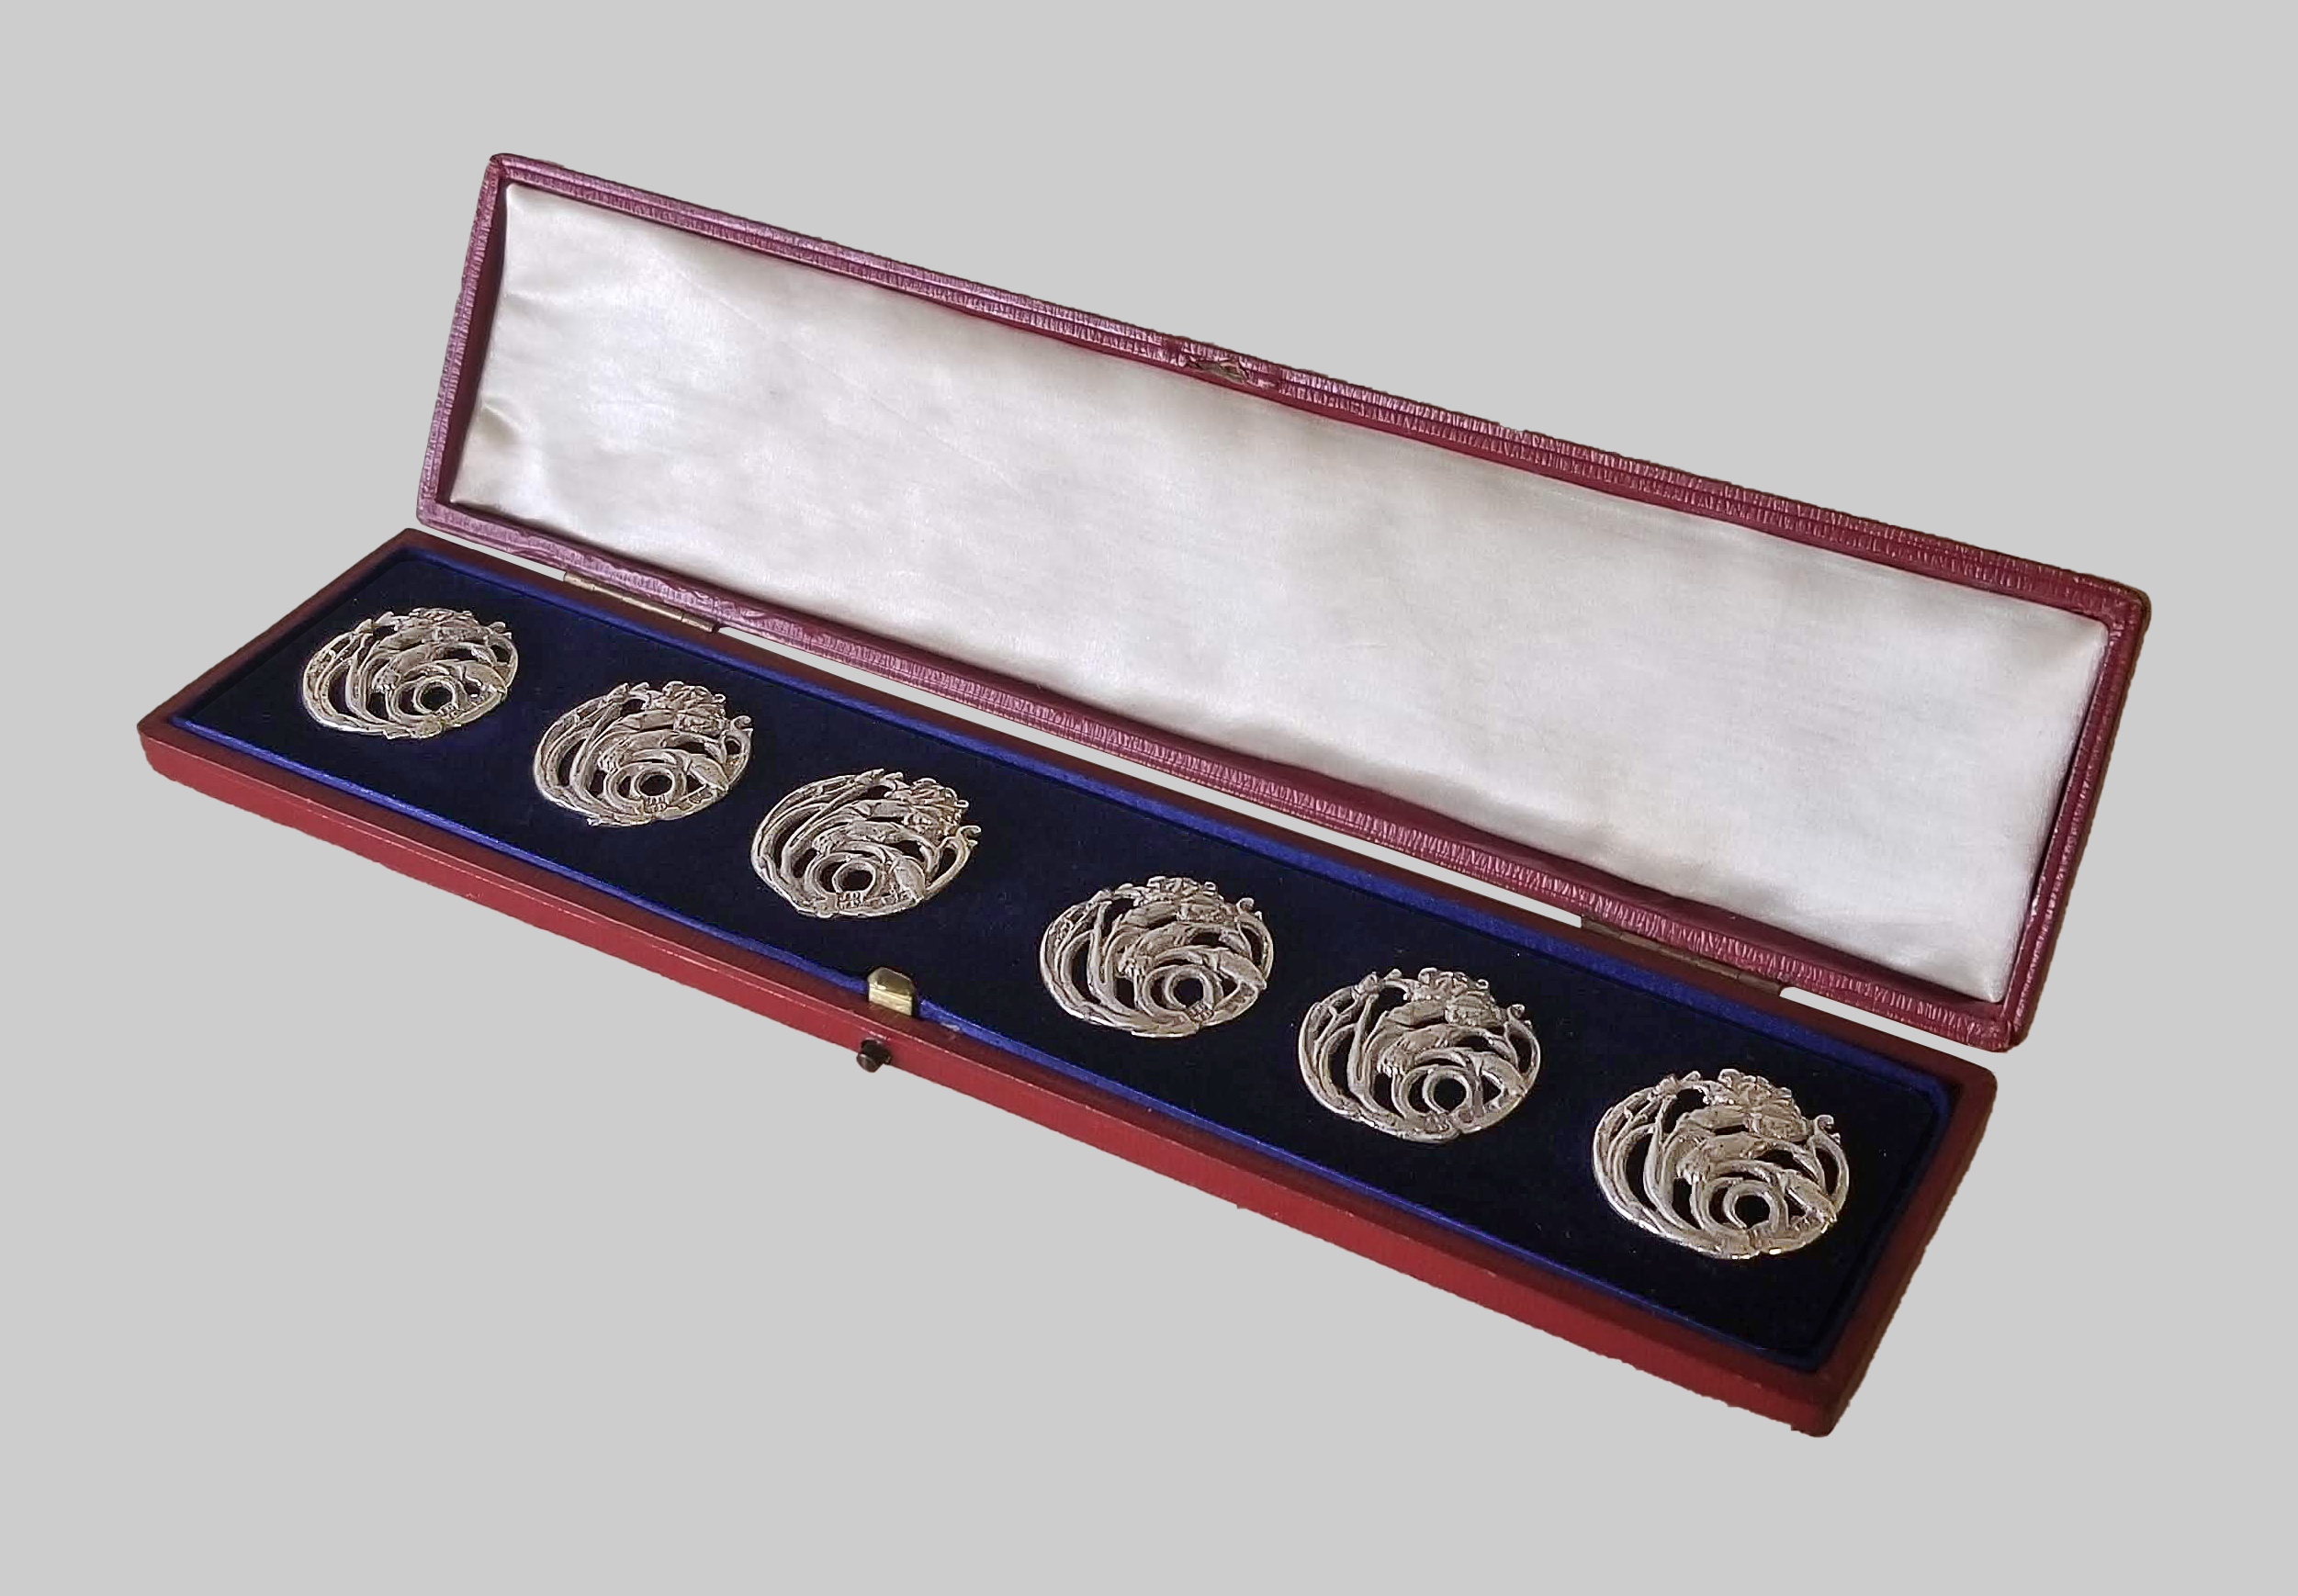 Fig. 5a - James Deakin & Sons Ltd., Buttons with carnations, 1901, sterling silver, TRRF Collection.